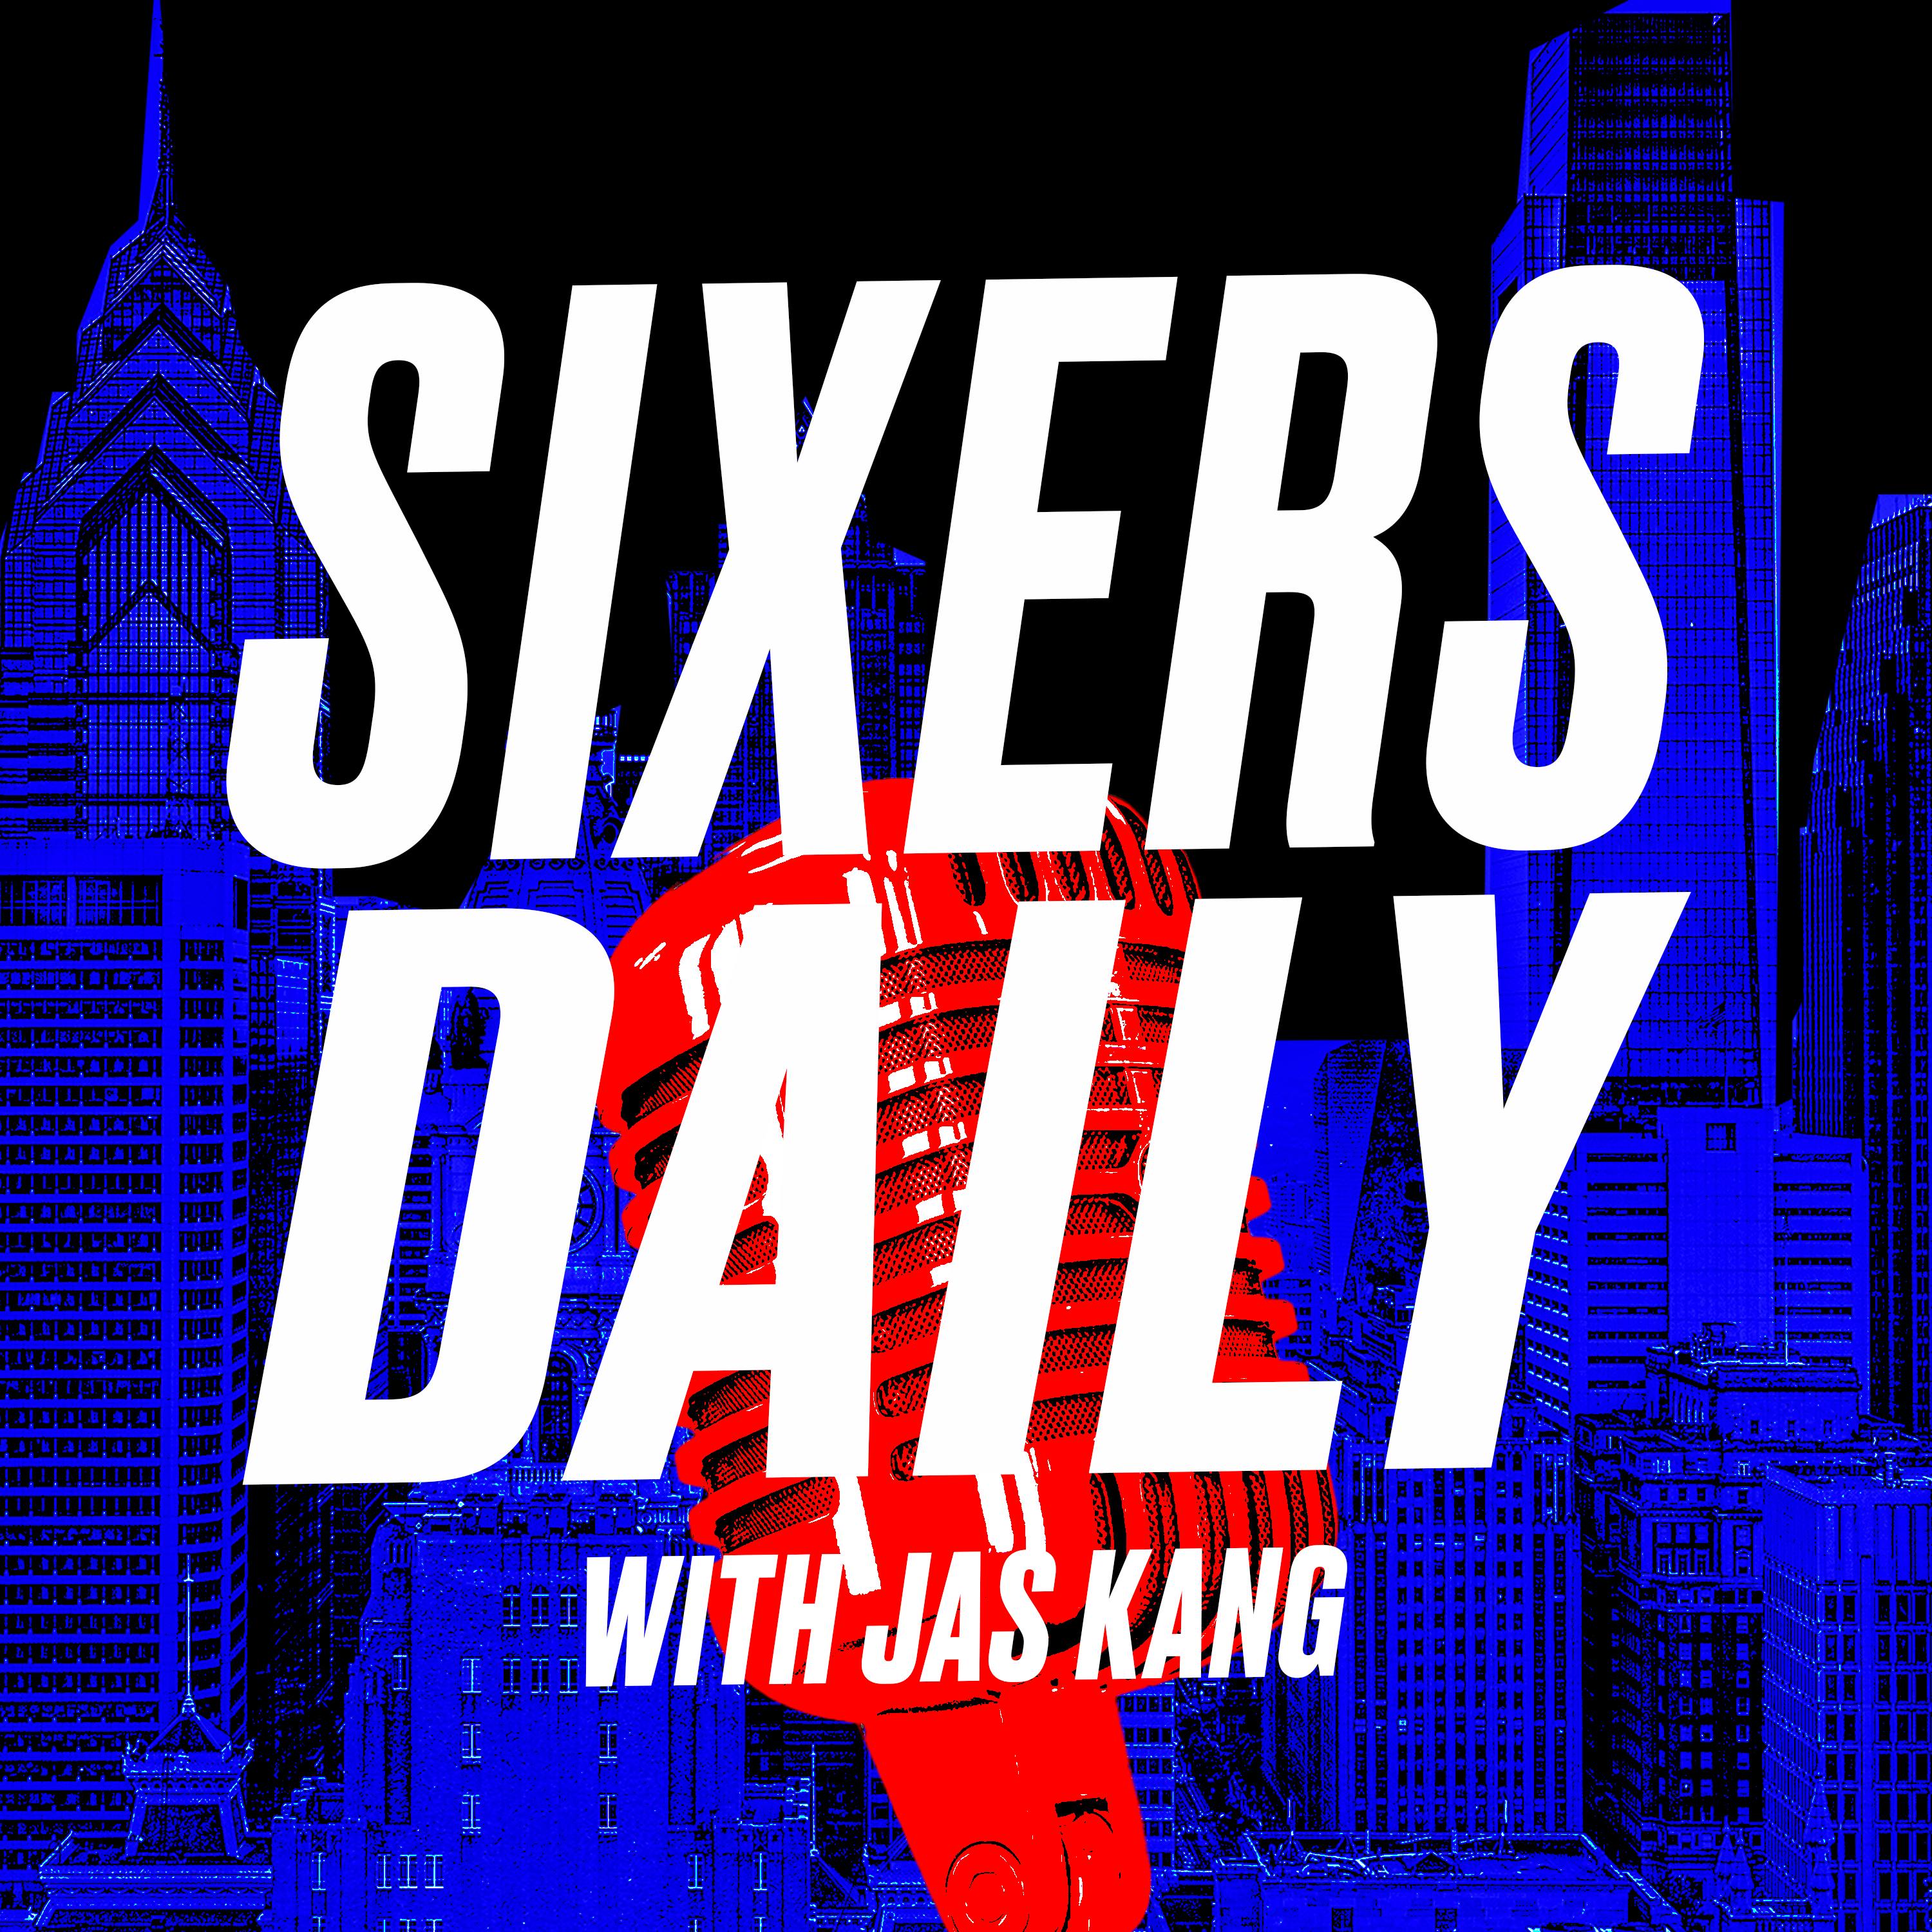 Sixers Daily with Jas Kang - James Harden's contract, Sixers Summer League, the Deandre Ayton rumors, Kevin Durant and more with Bryan Toporek